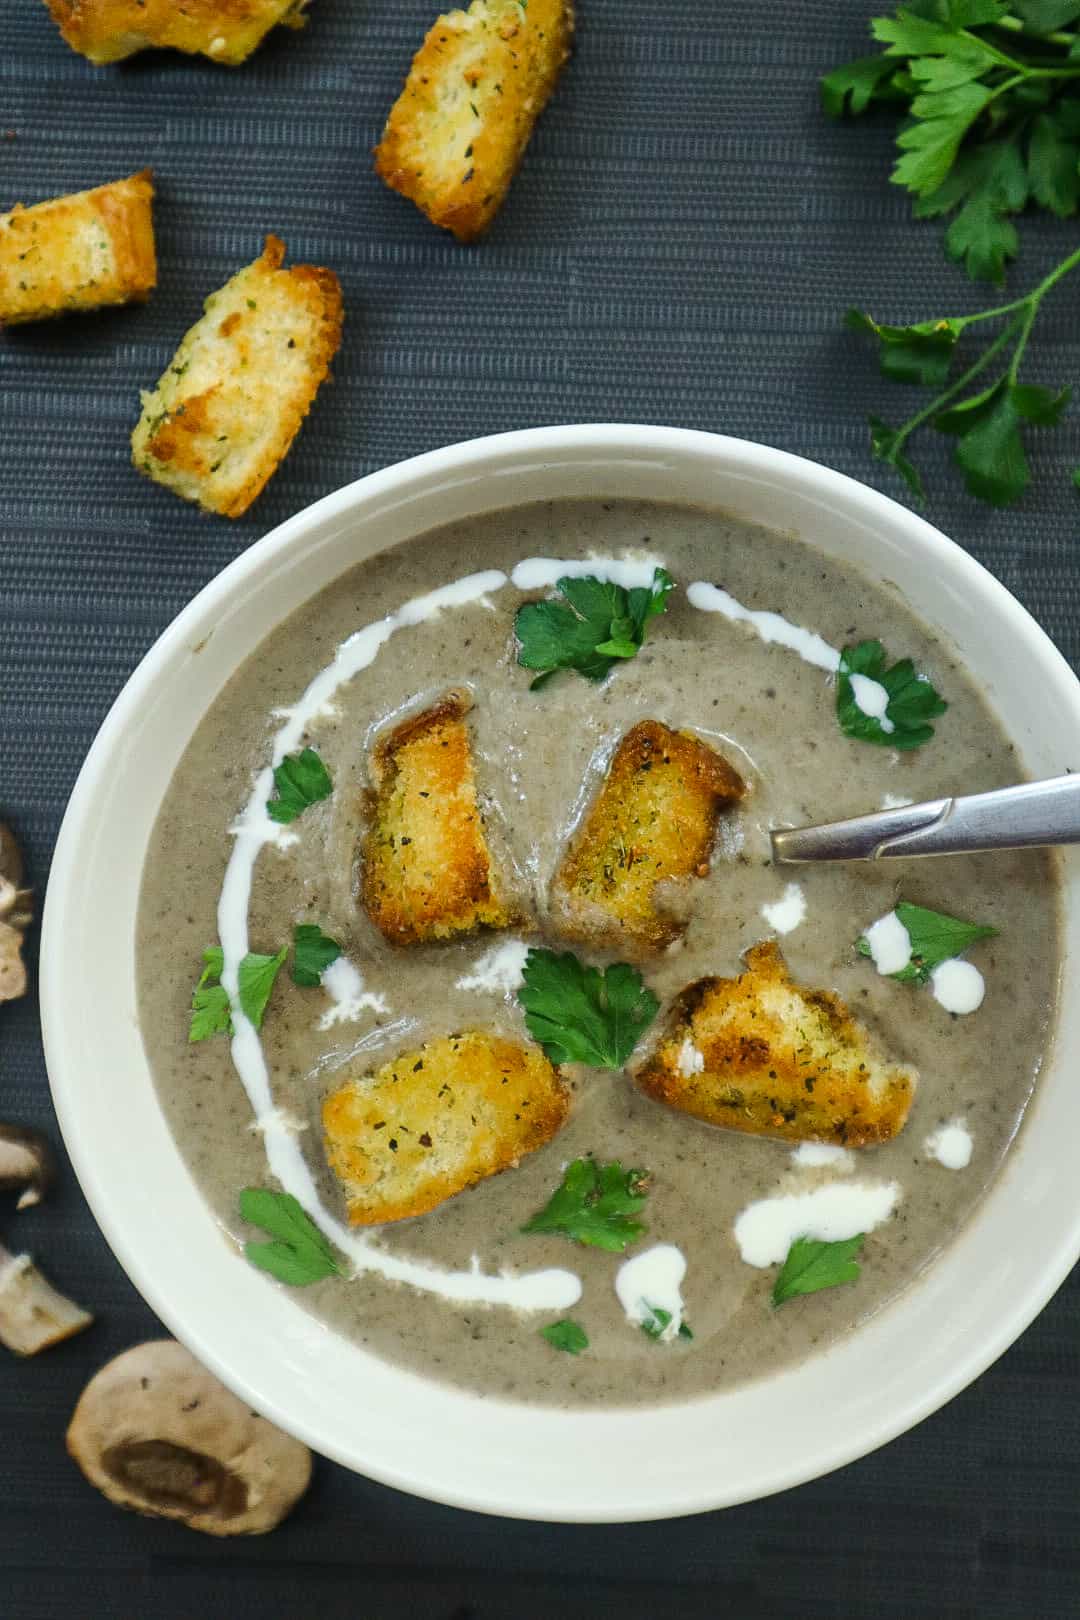 A bowl of mushroom soup, some homemade croutons on top and parsley.